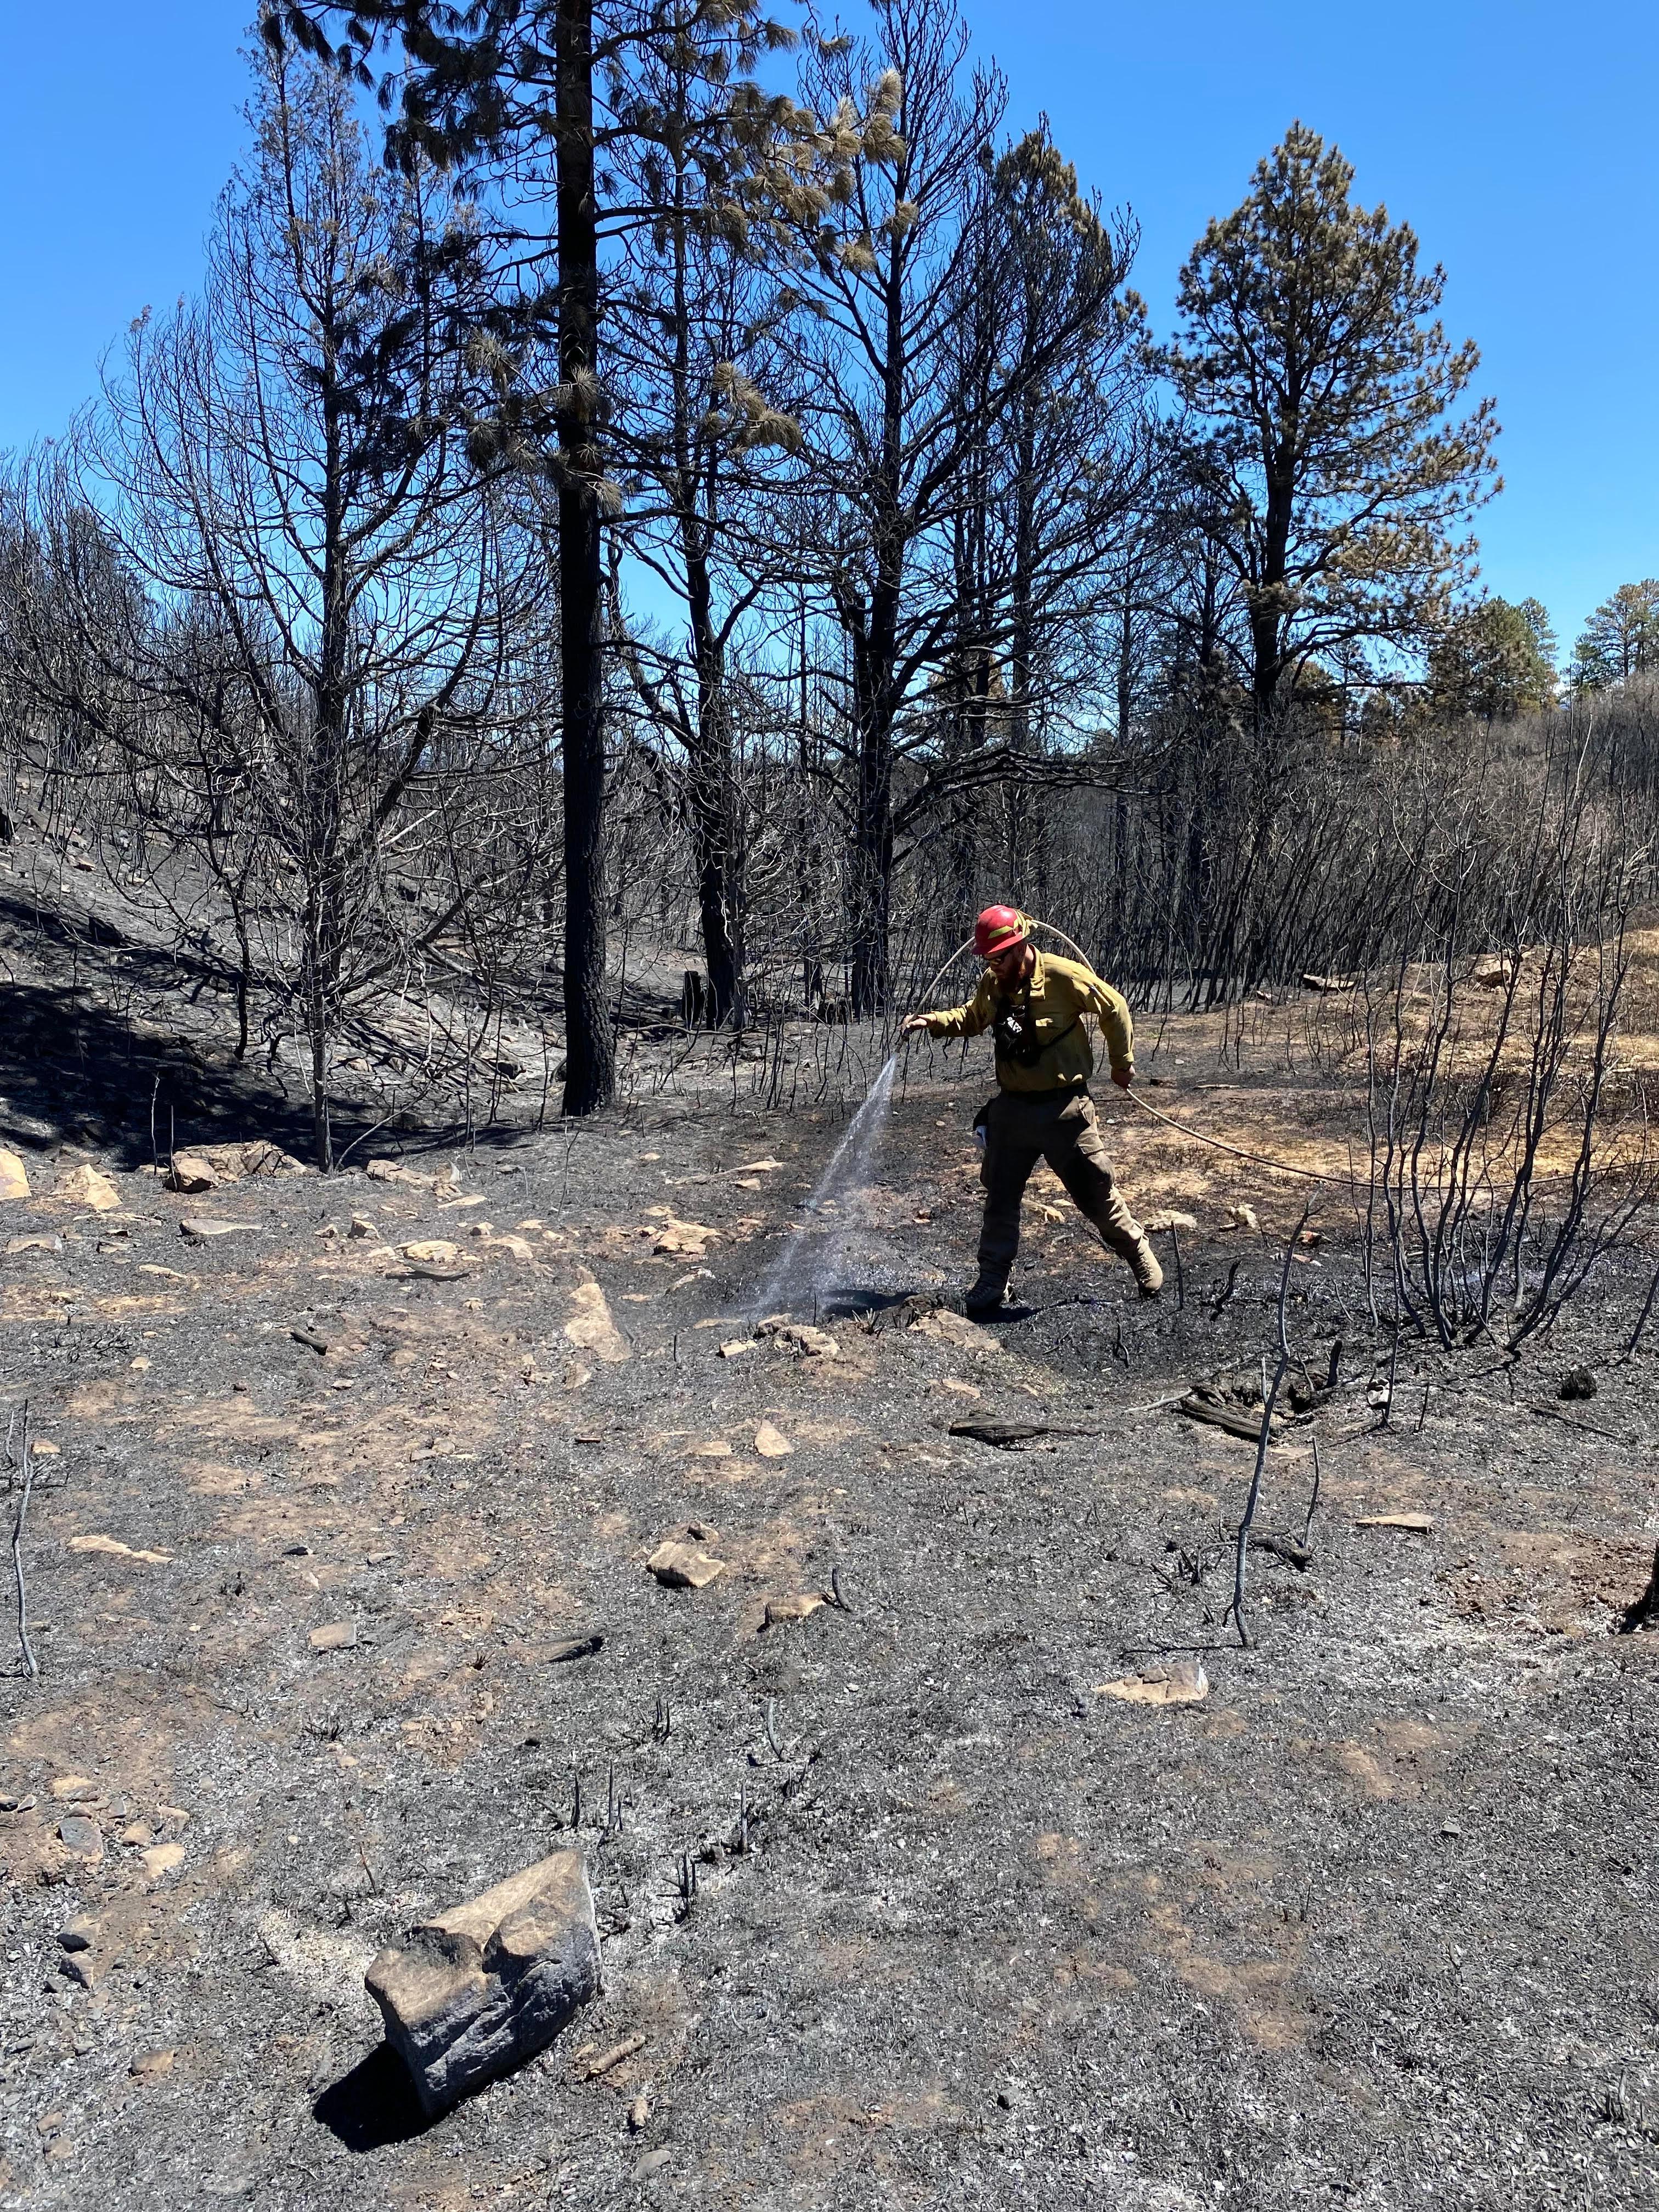 Firefighters reseed the burn area